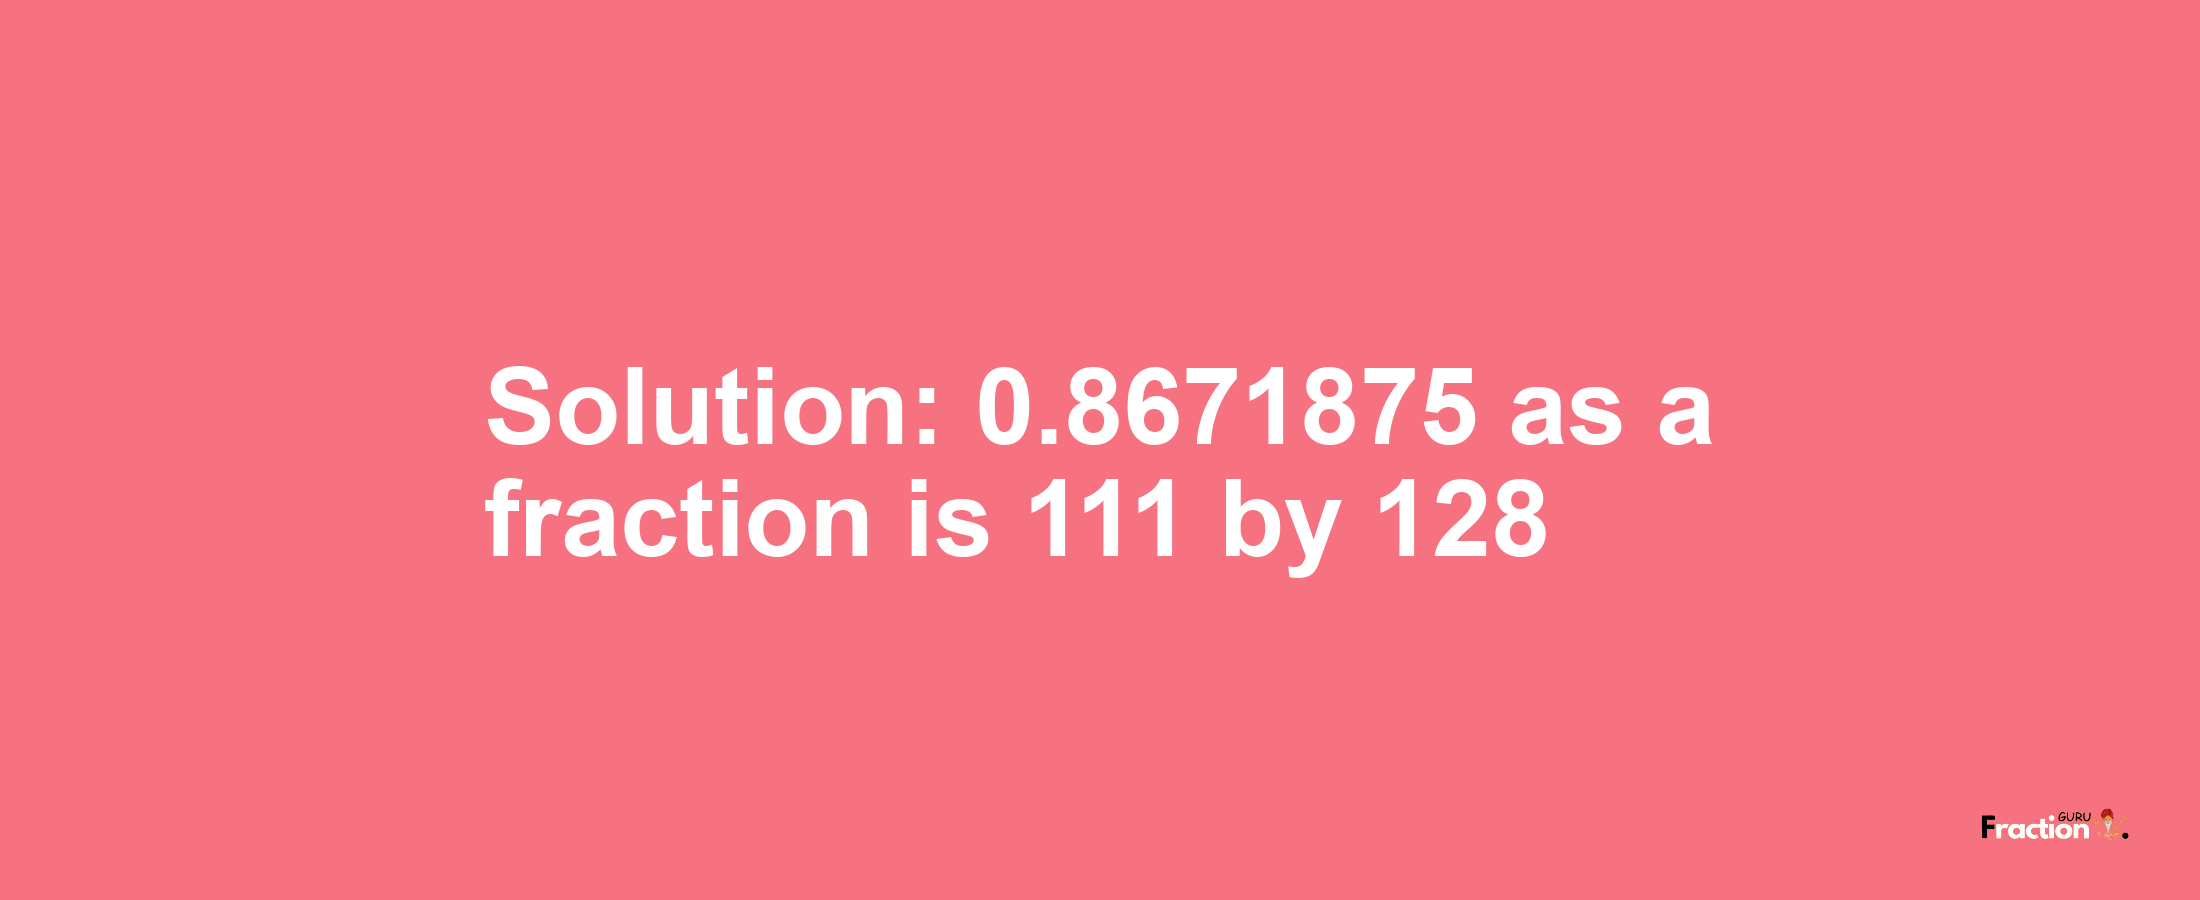 Solution:0.8671875 as a fraction is 111/128